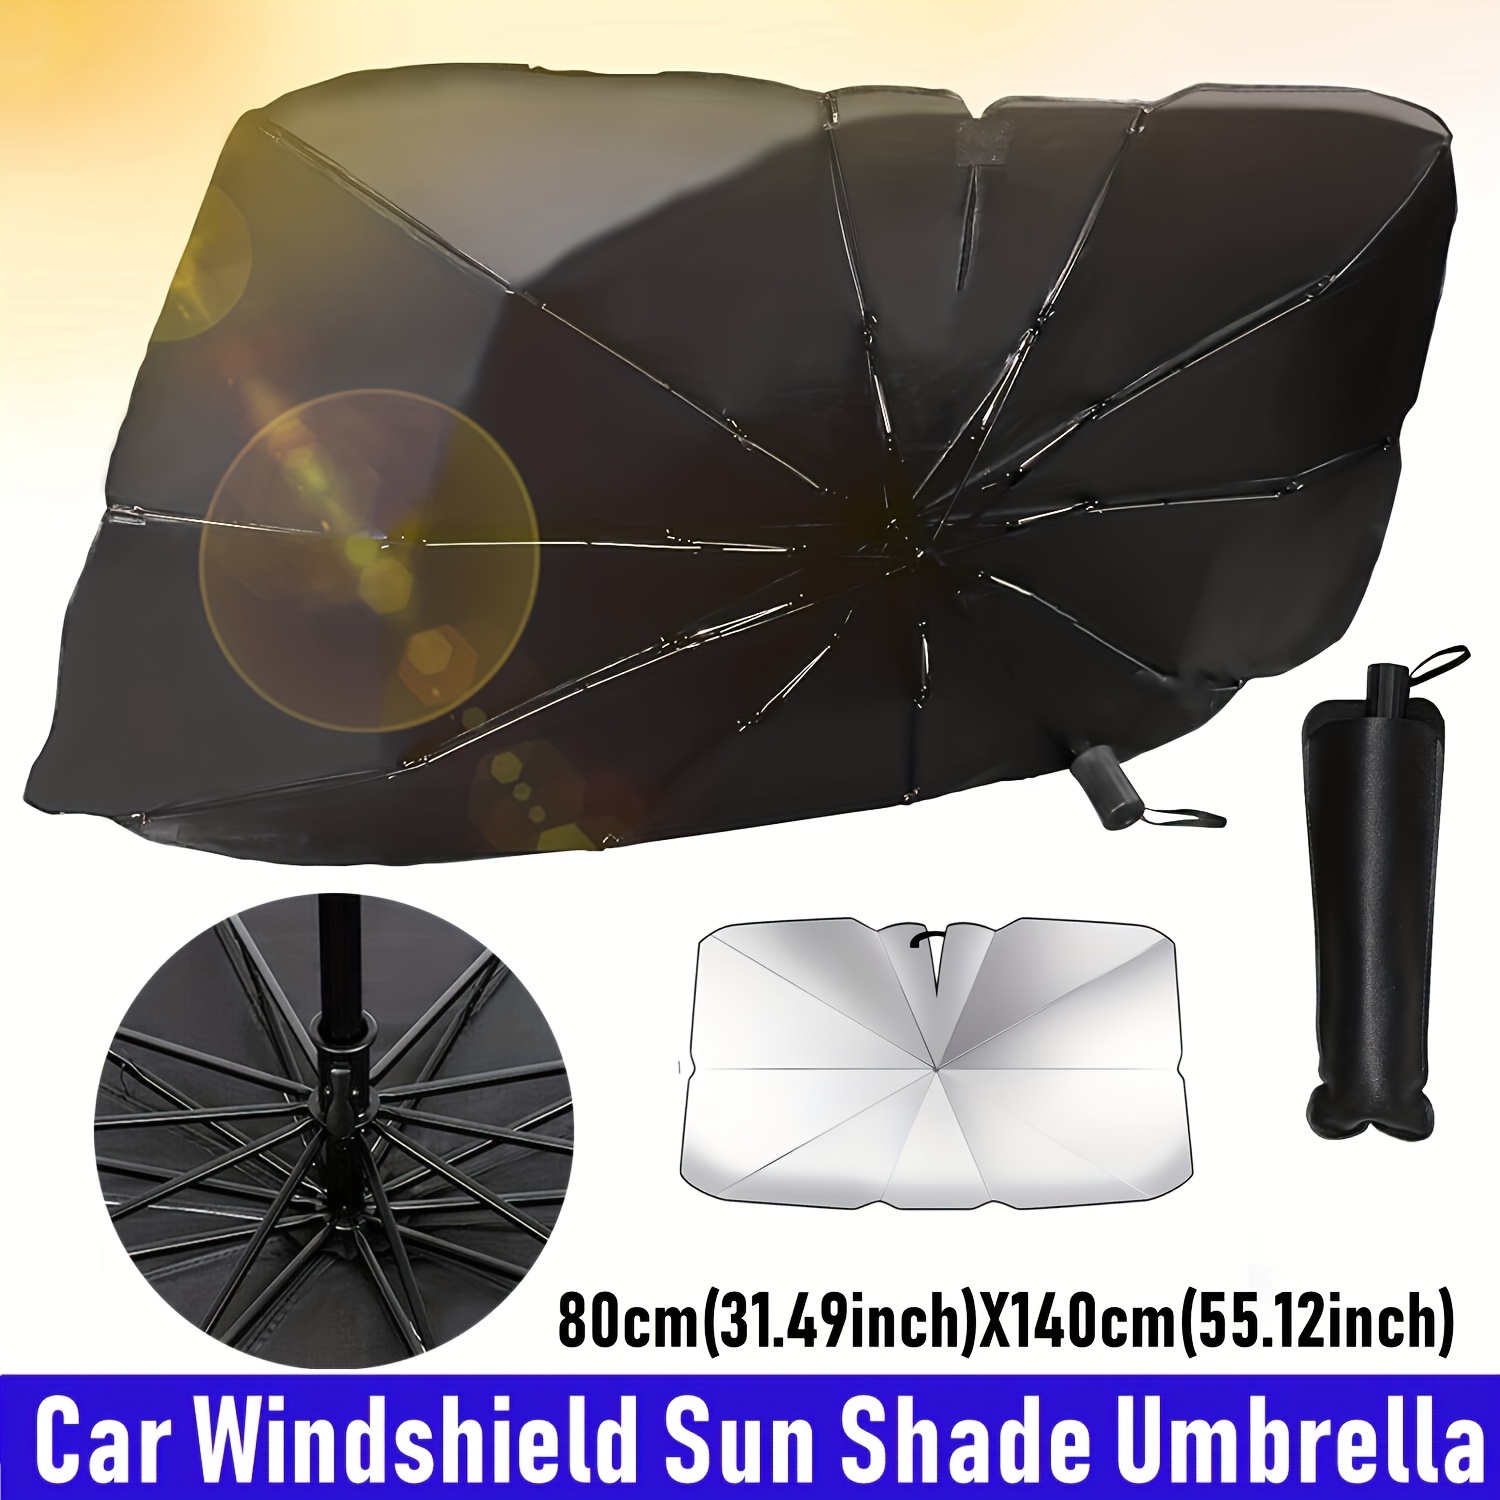 Car Windshield Sun Shade Umbrella With Bendable Rod And Viewmirror Cut-Out,  Foldable Car Umbrella Sunshade Cover With Storebag For Block UV Keep Cool